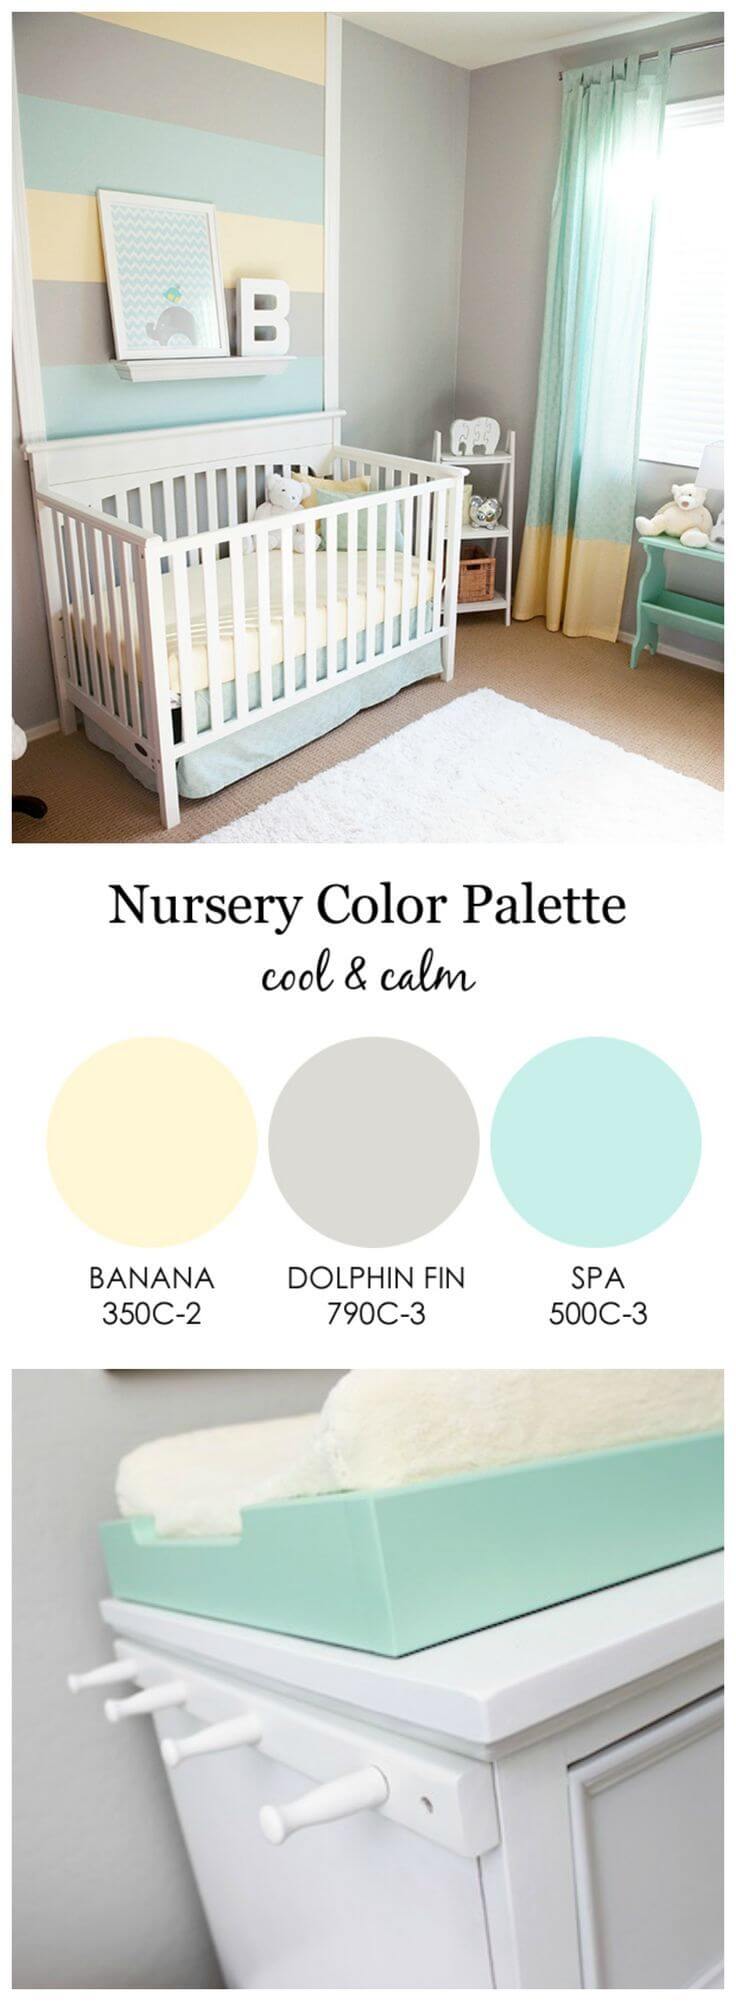 Gray is the New Addition to Nursery Color Palettes